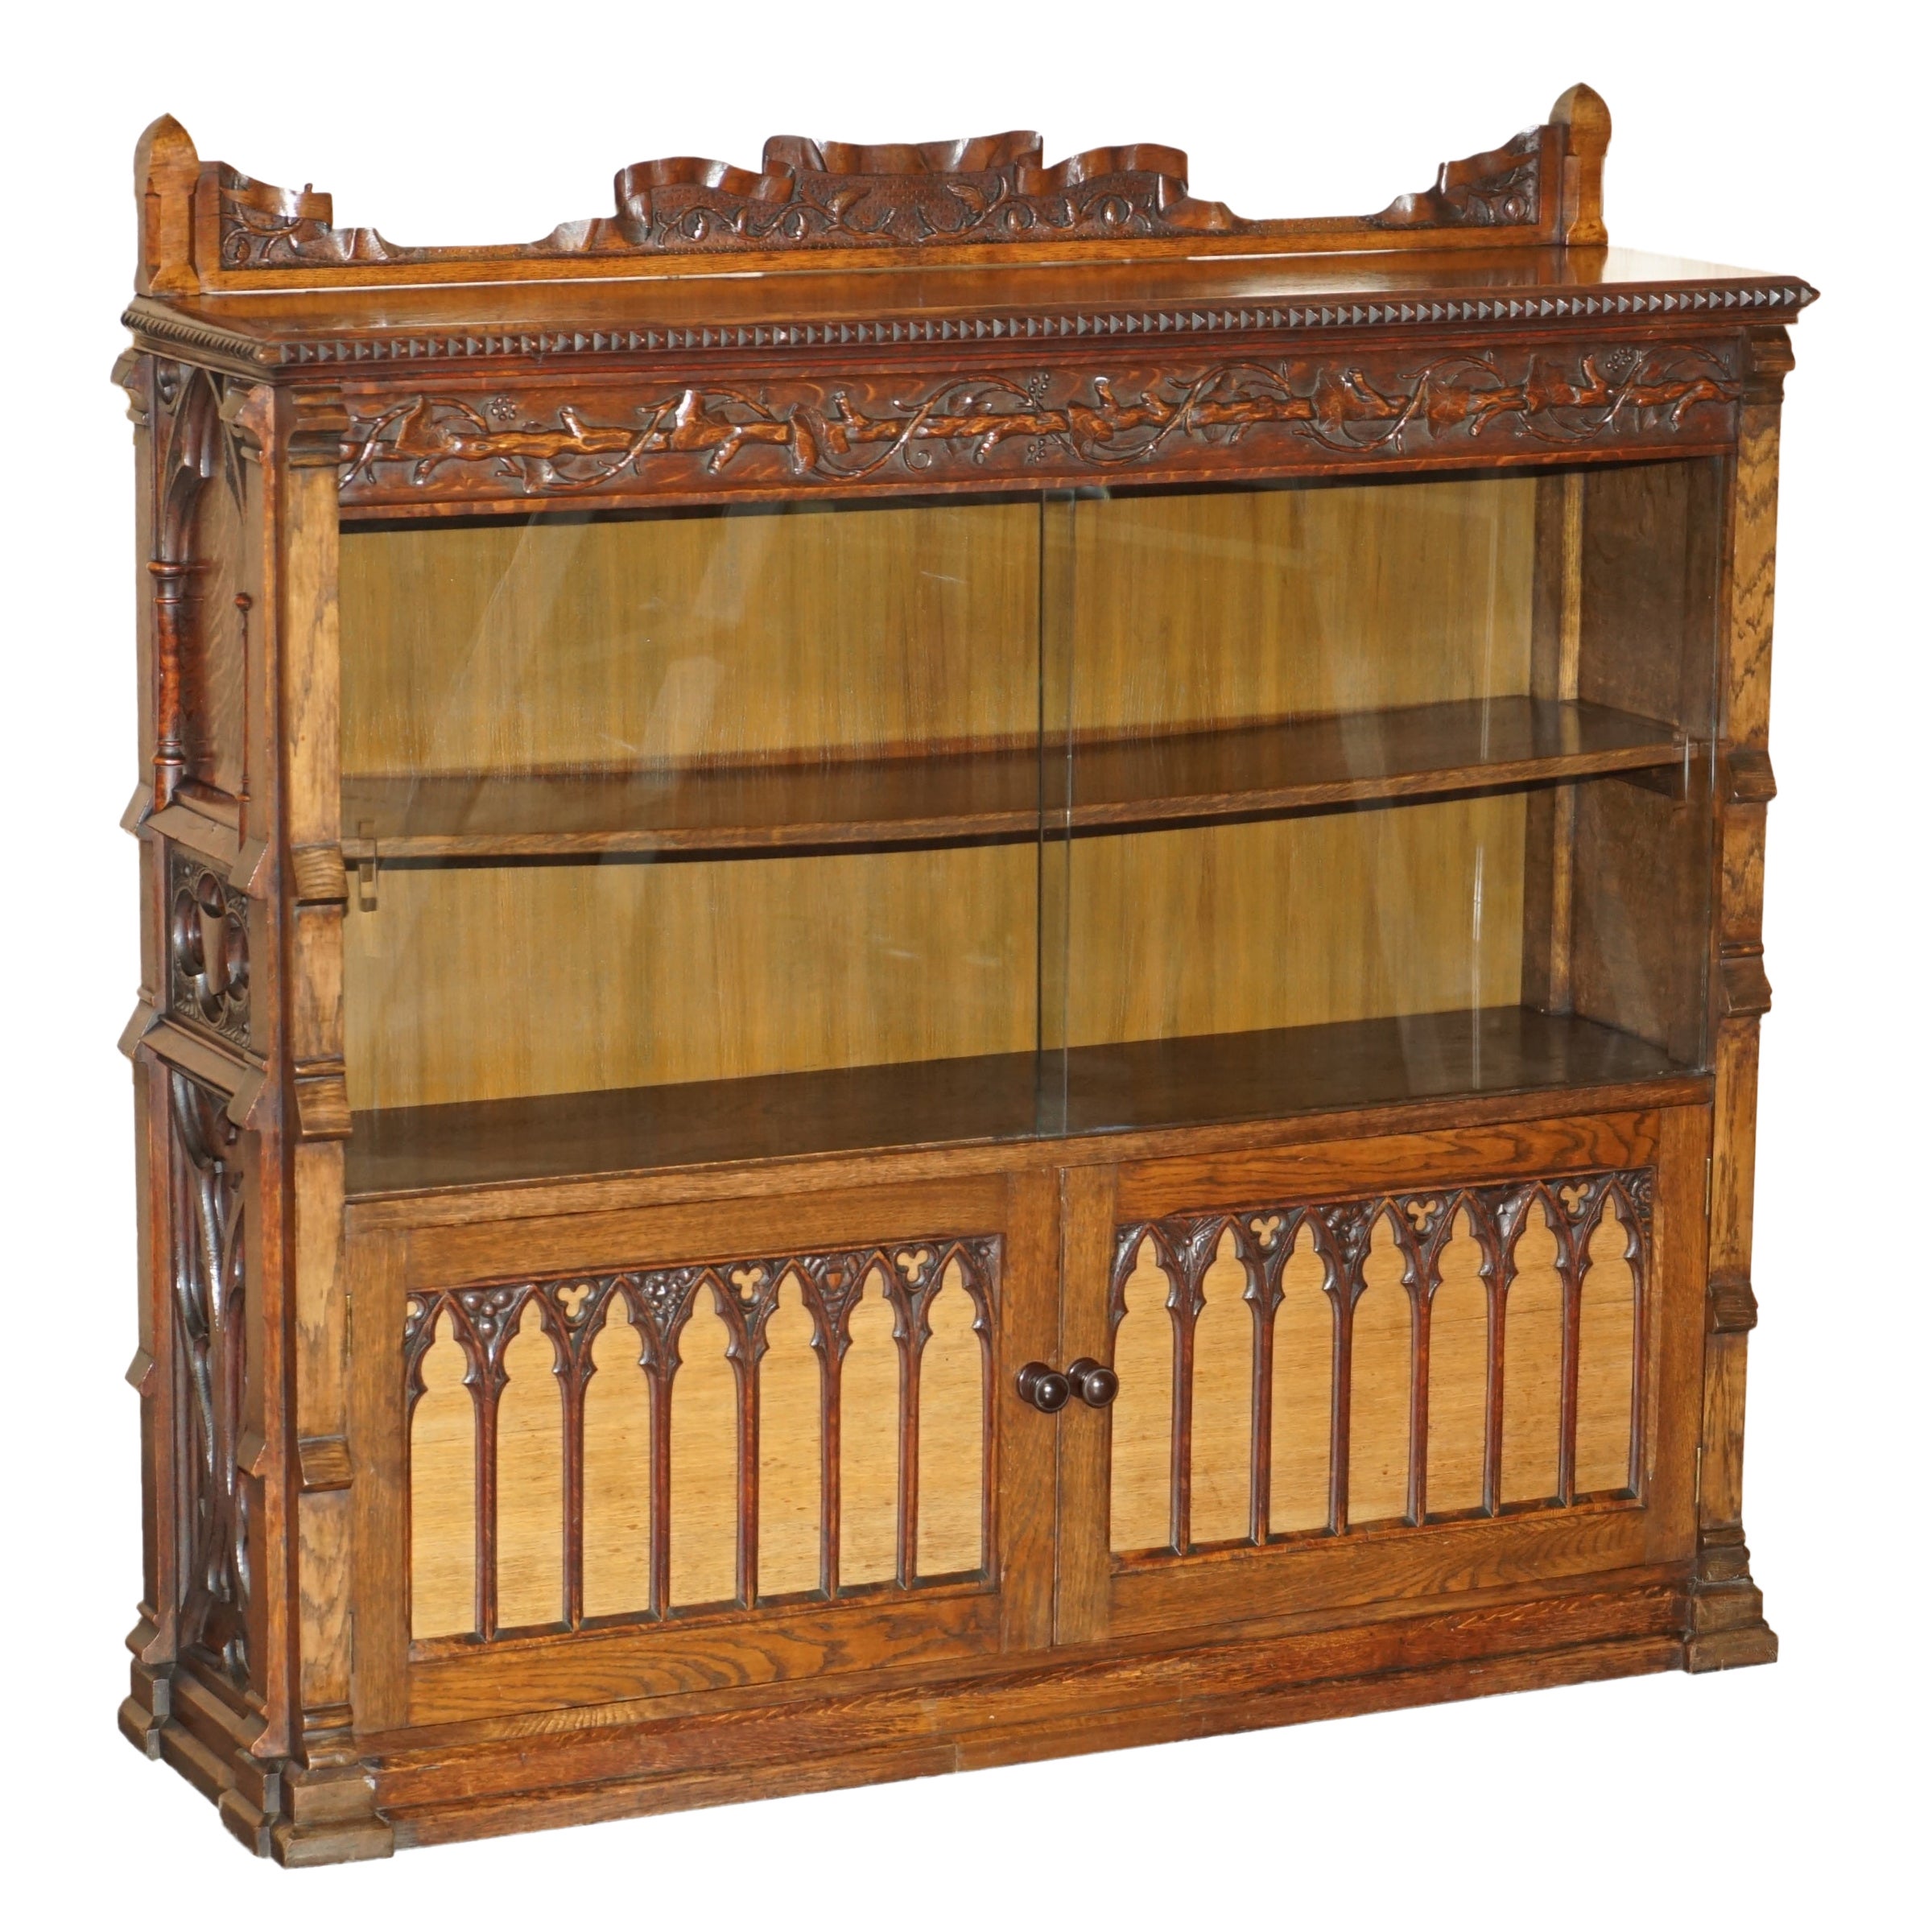 EXQUISiTE & IMPORTANT ORNATELY HAND CARVED GOTHIC REVIVAL PUGIN STYLE BOOKCASE For Sale